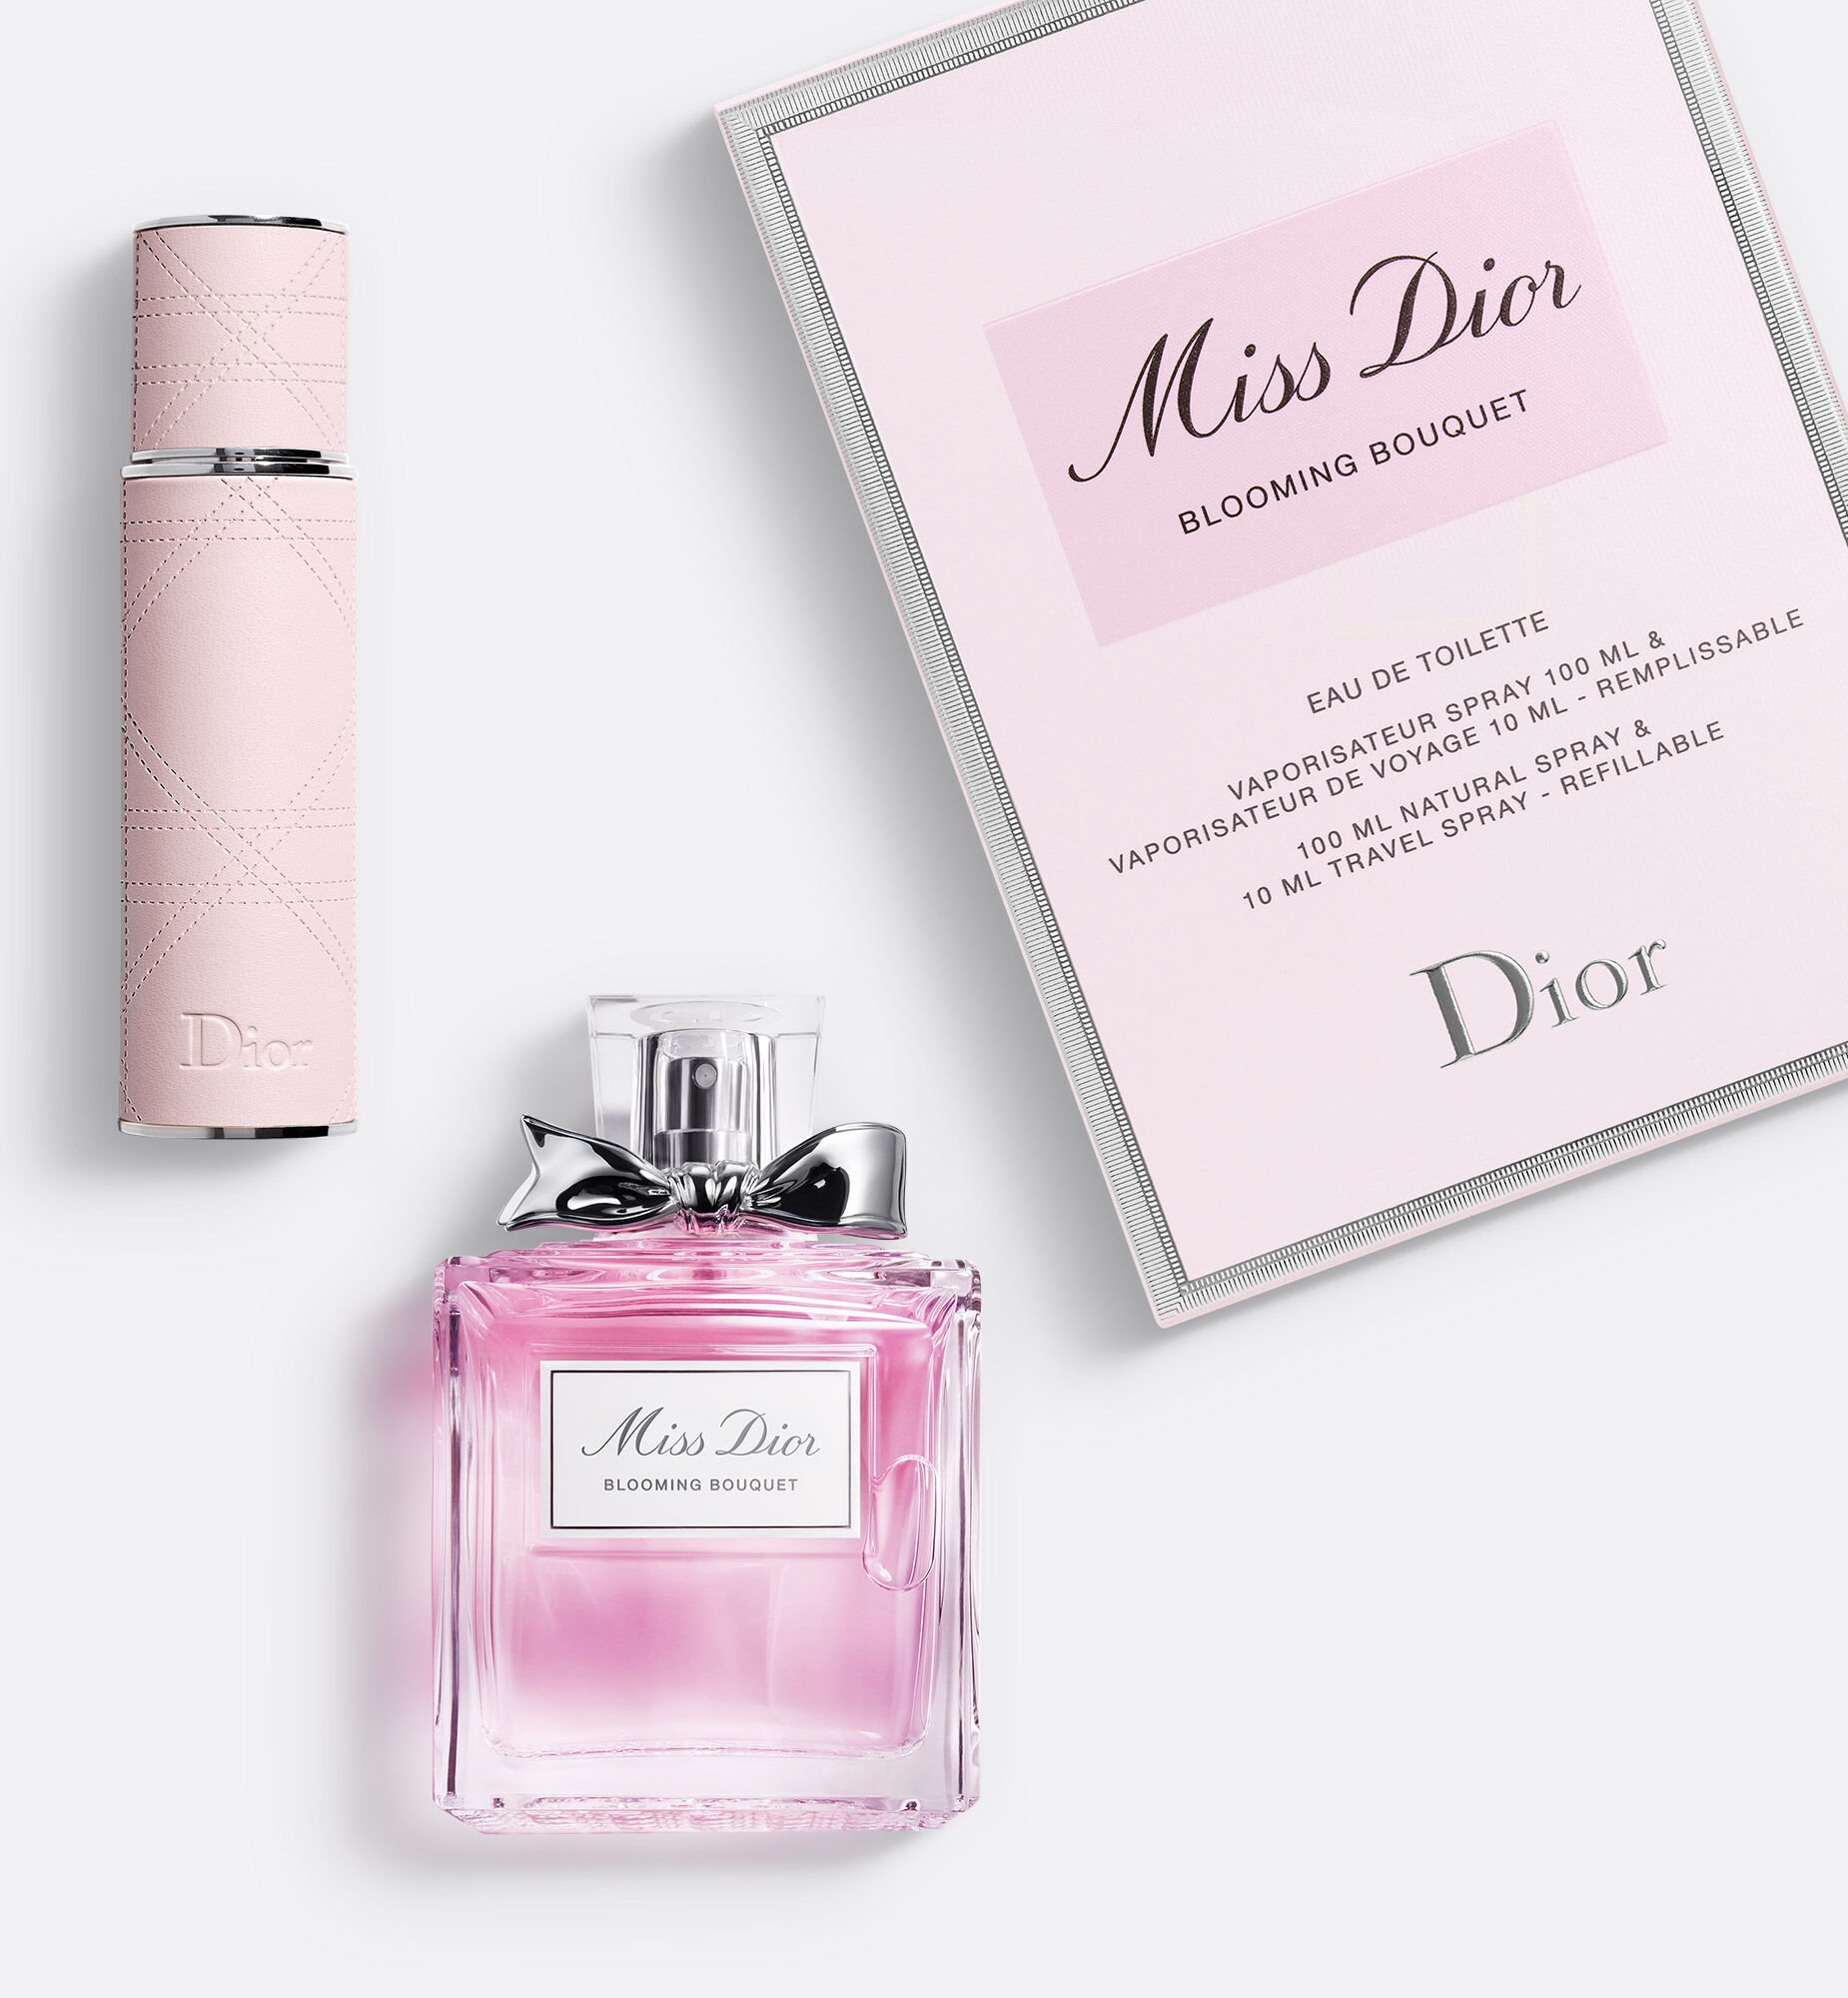 Miss Dior Blooming Bouquet 100ml | myglobaltax.com